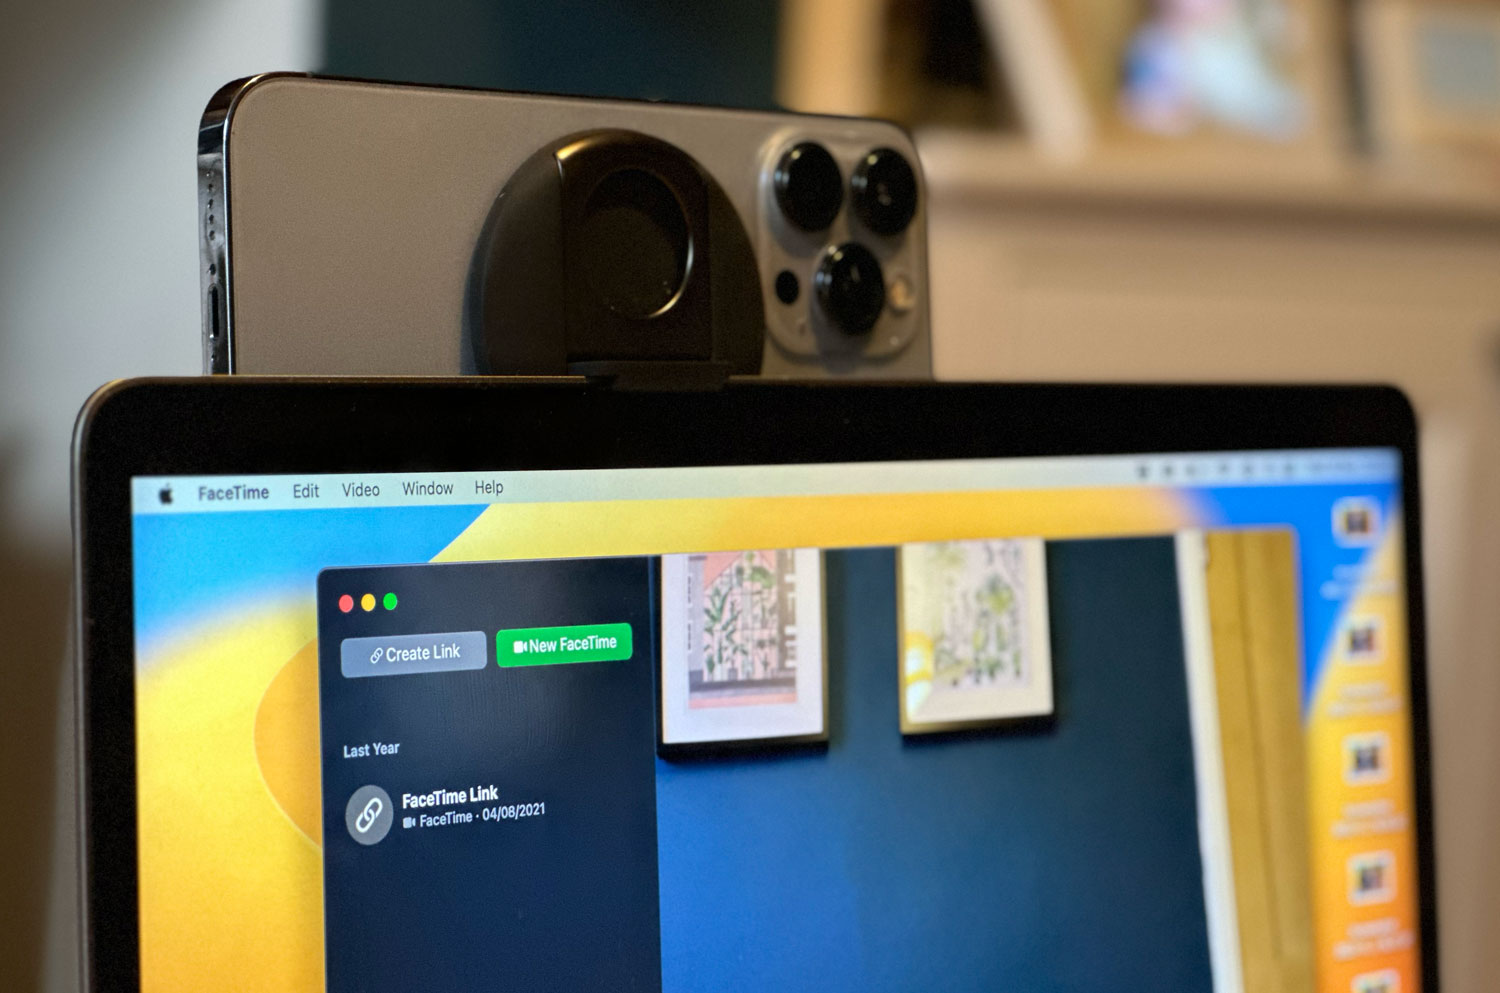 Use iPhone as Webcam with Continuity Camera in macOS Ventura